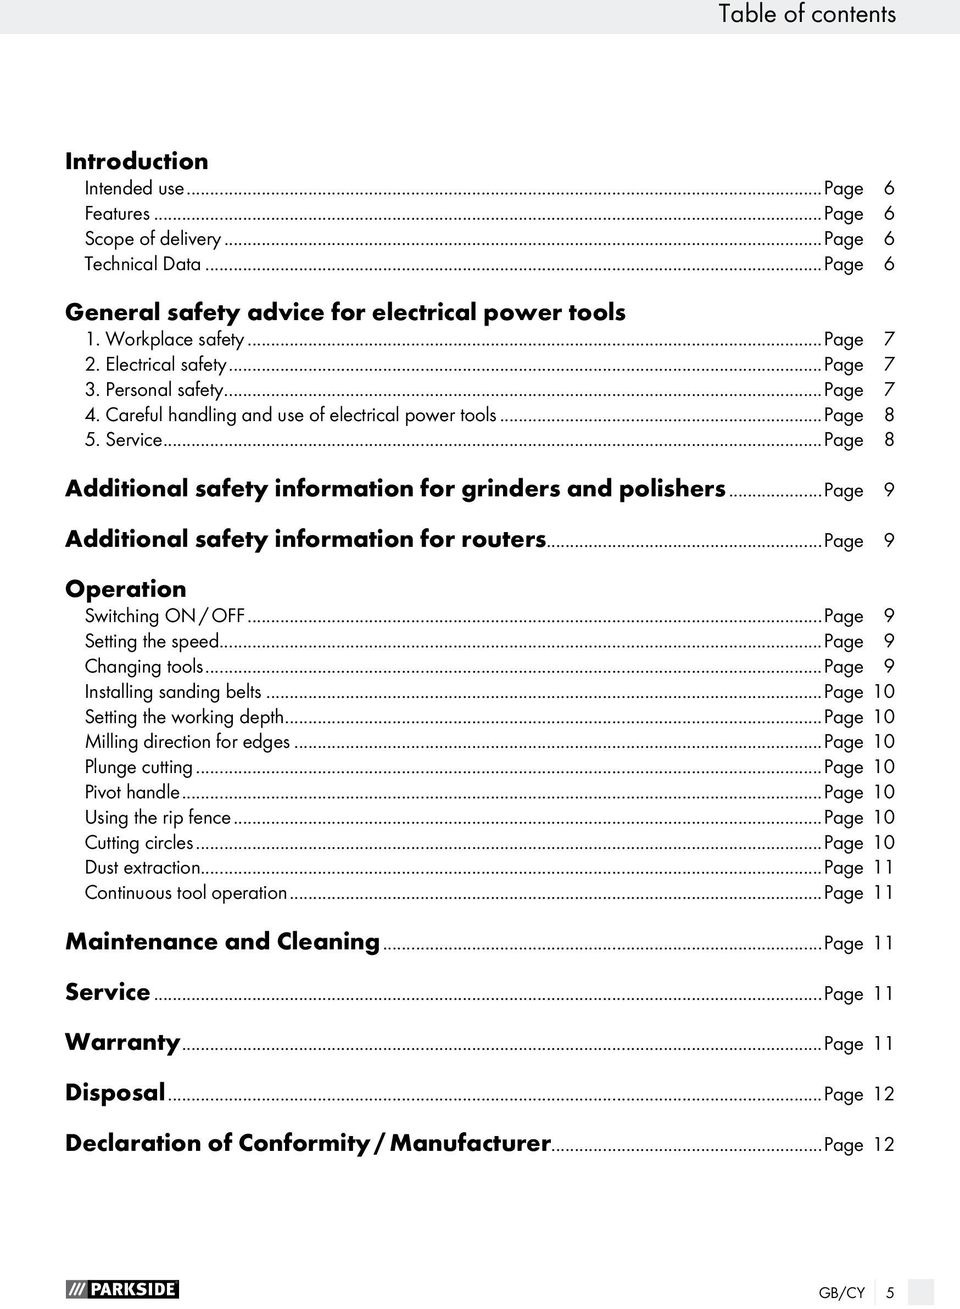 ..page 9 Additional safety information for routers...page 9 Operation Switching ON / OFF...Page 9 Setting the speed...page 9 Changing tools...page 9 Installing sanding belts.